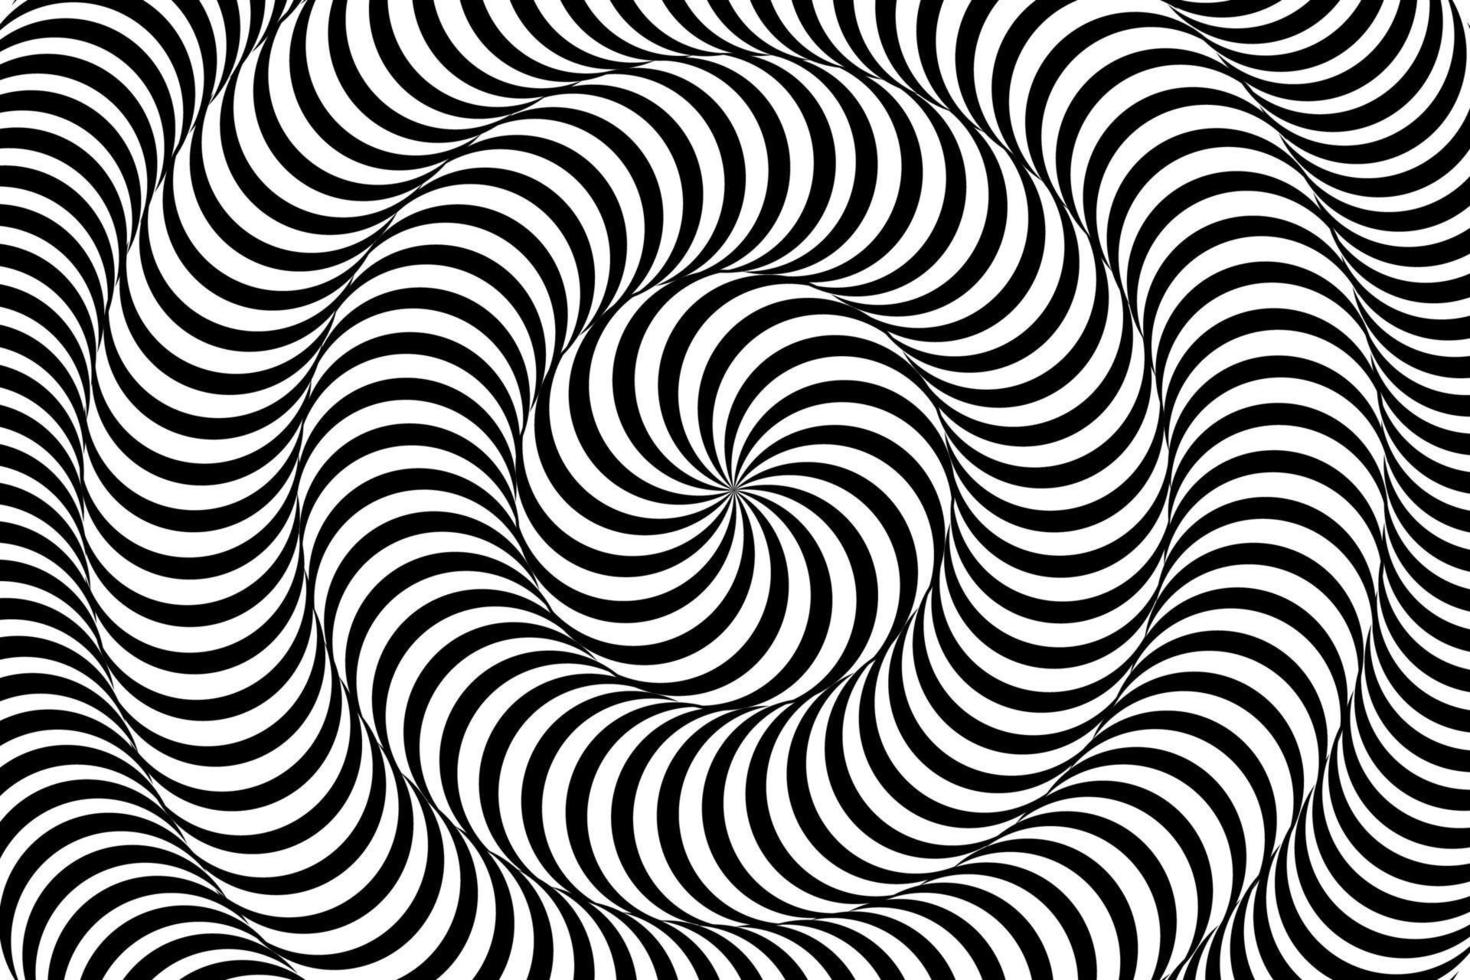 Abstract optical illusion spiral background vector